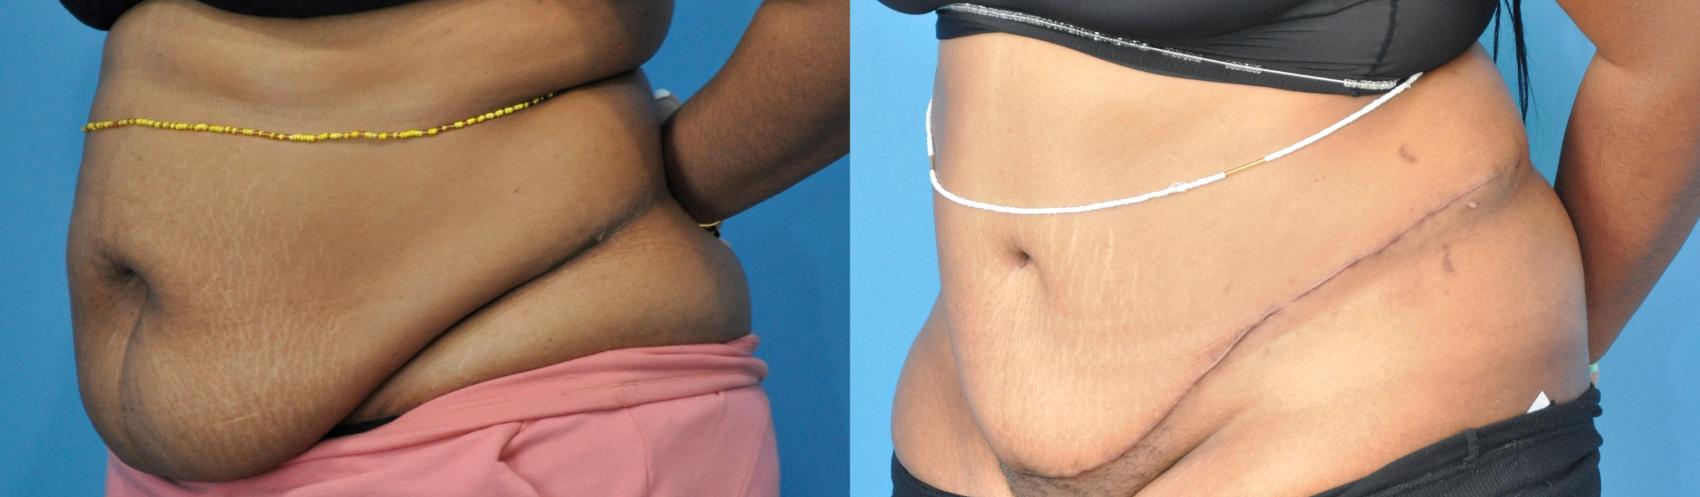 Before & After Abdominoplasty/Tummy Tuck Case 277 Left Oblique View in Northbrook, IL